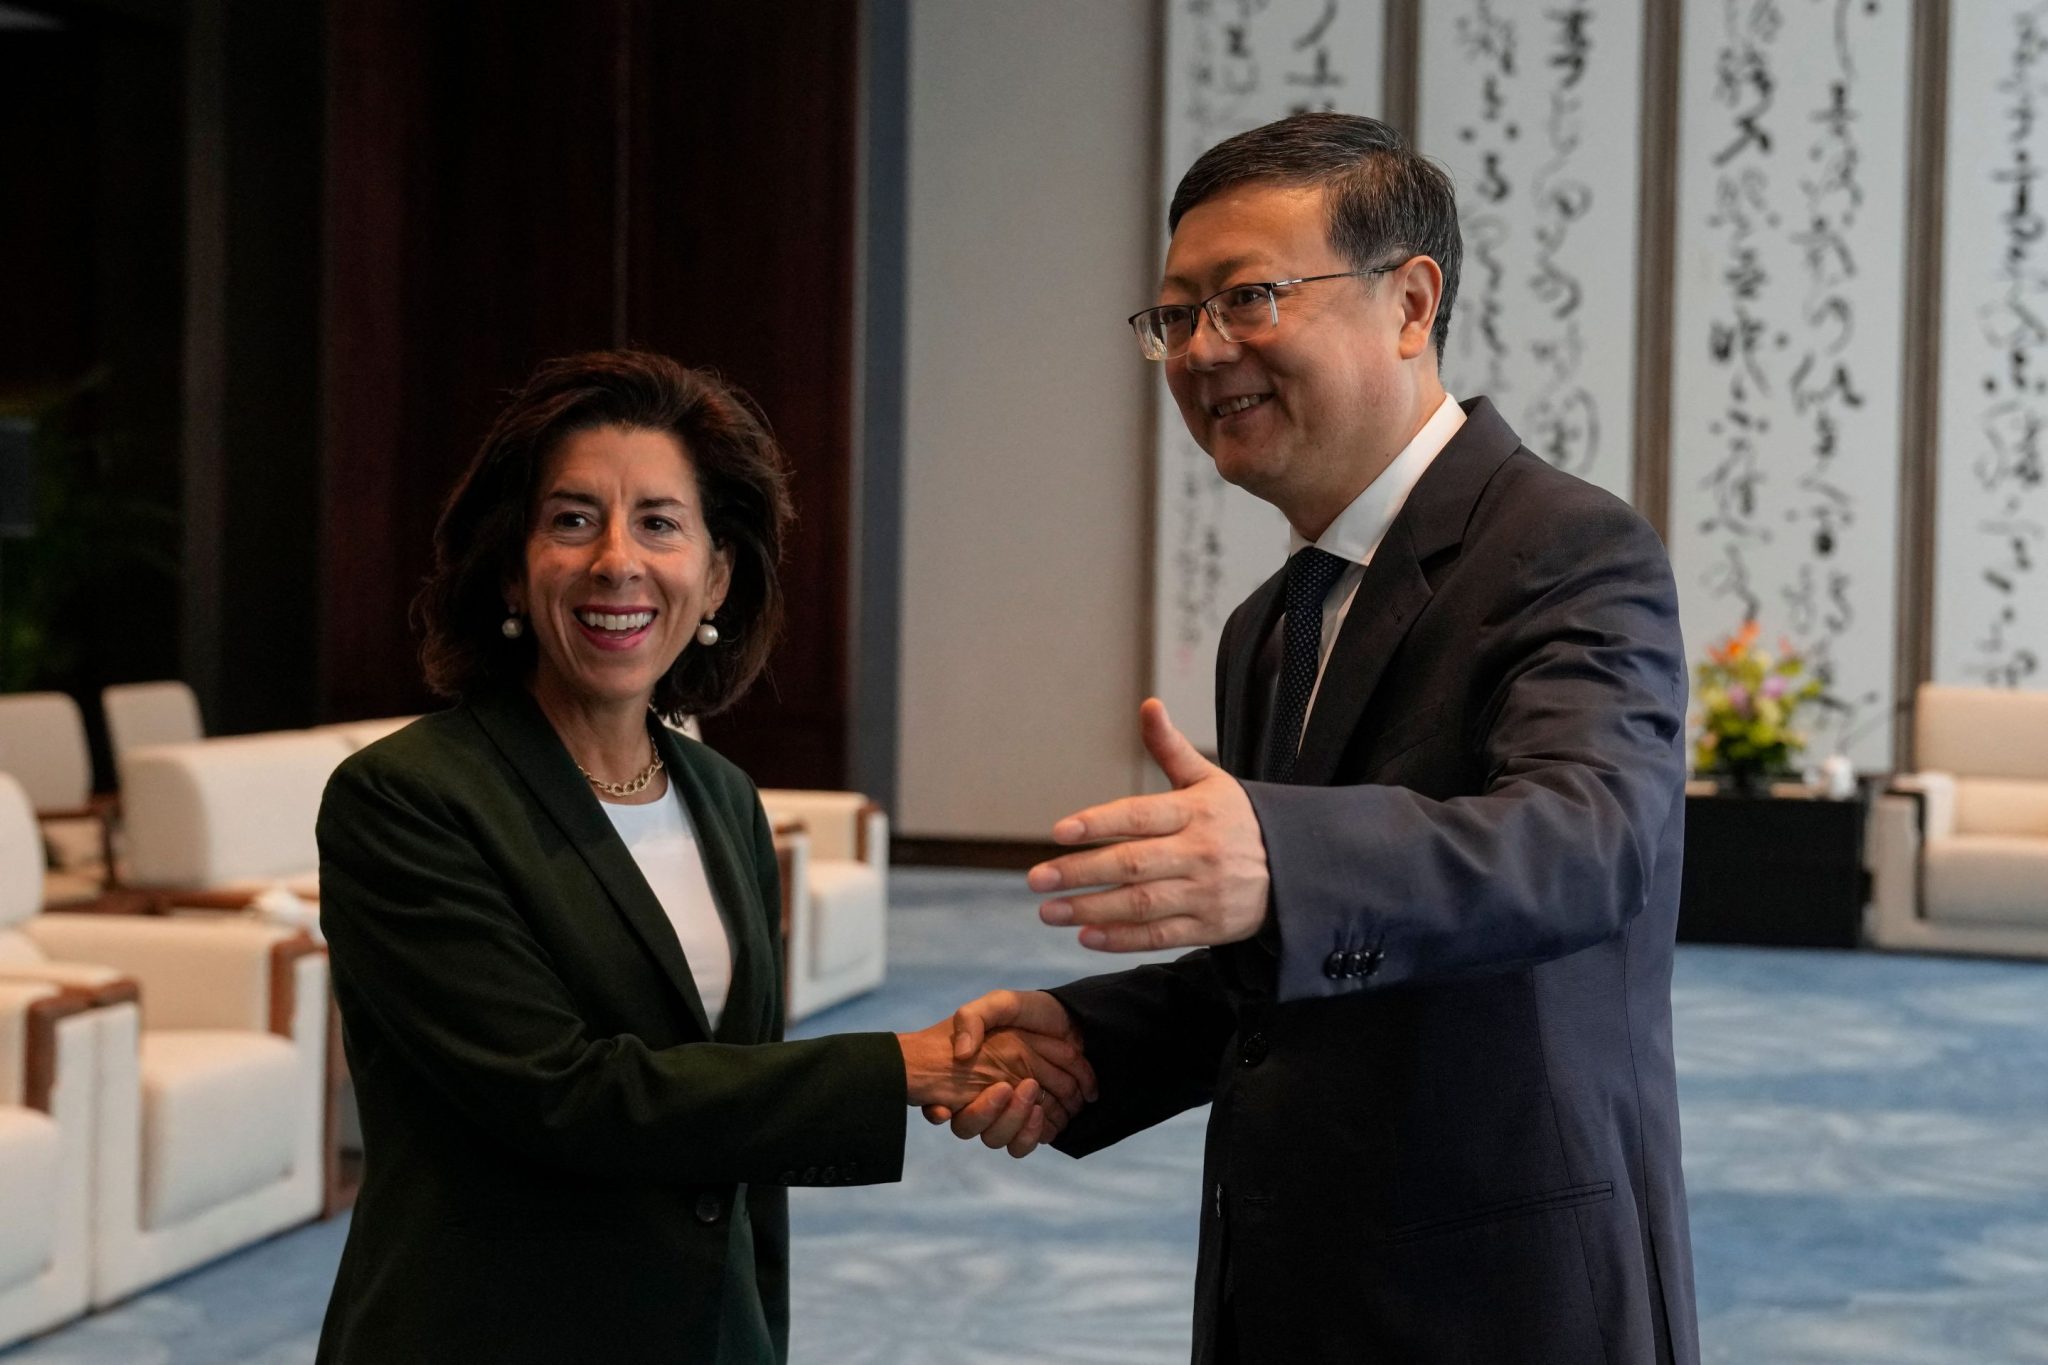 Commerce Secretary Gina Raimondo on her working group with China: ‘Hopefully the baby steps lead to bigger steps’